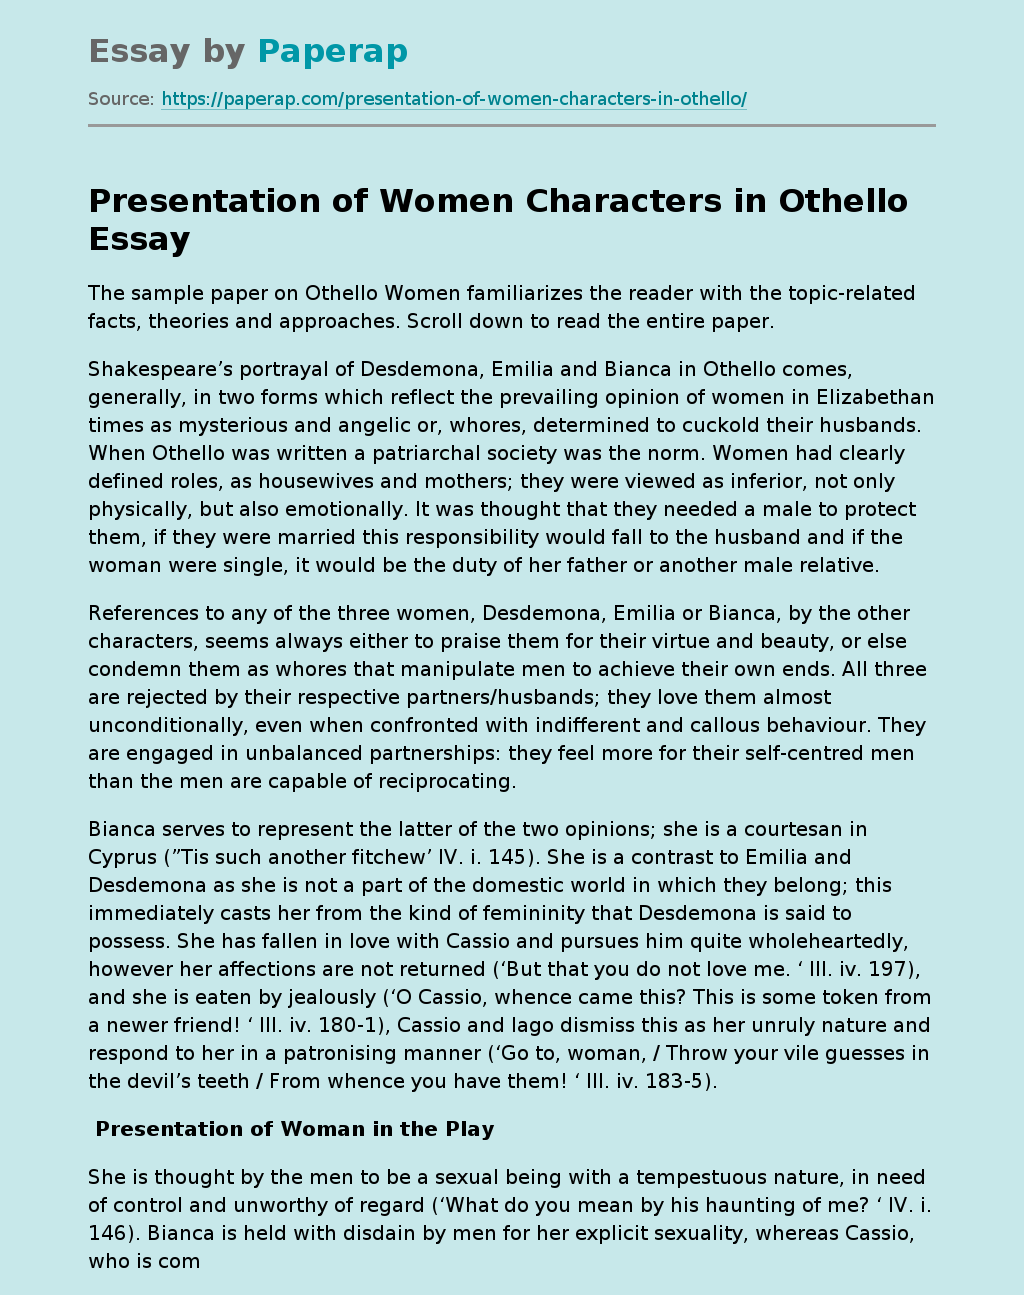 Presentation of Women Characters in Othello